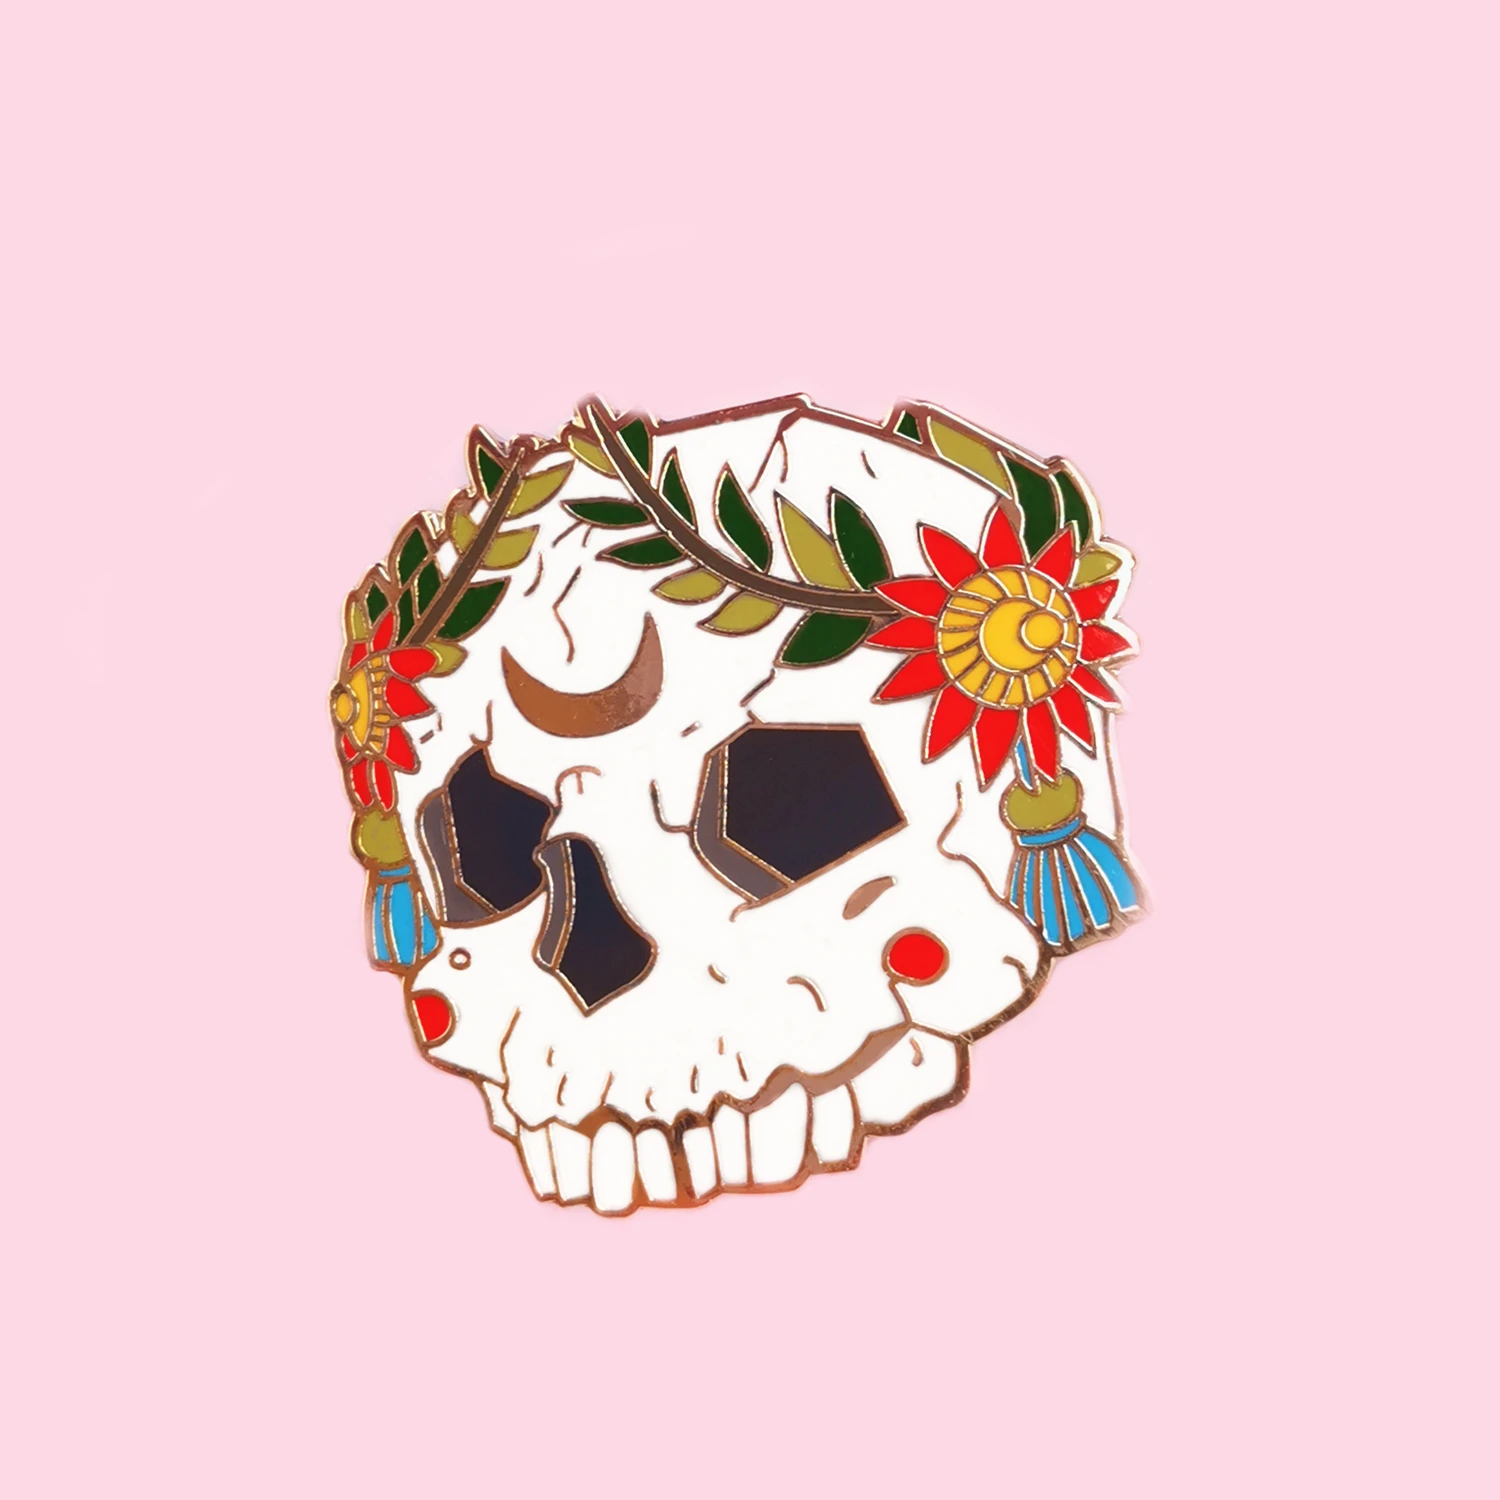 

Gorgeous Flowers Skull Hard Enamel Pin Charm Unique Plant Sun Flower Brooch Fashion Backpack Lapel Pins Gothic Halloween Gift